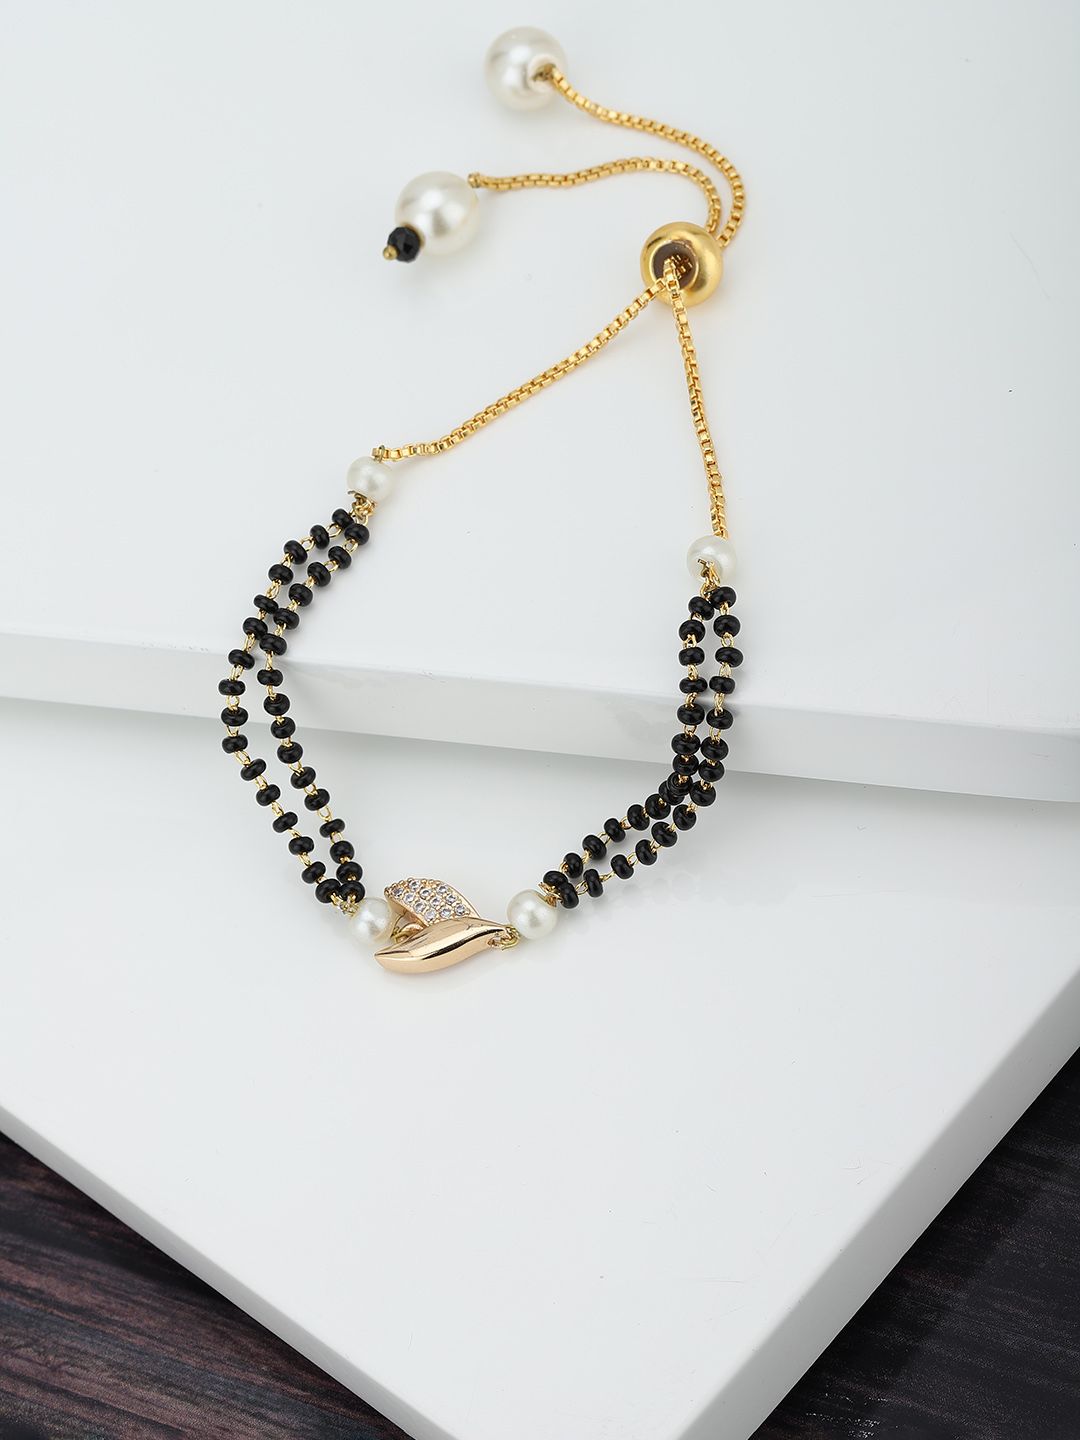 Carlton London Black Gold-Plated Beaded & CZ-Studded Handcrafted Mangalsutra Bracelet Price in India